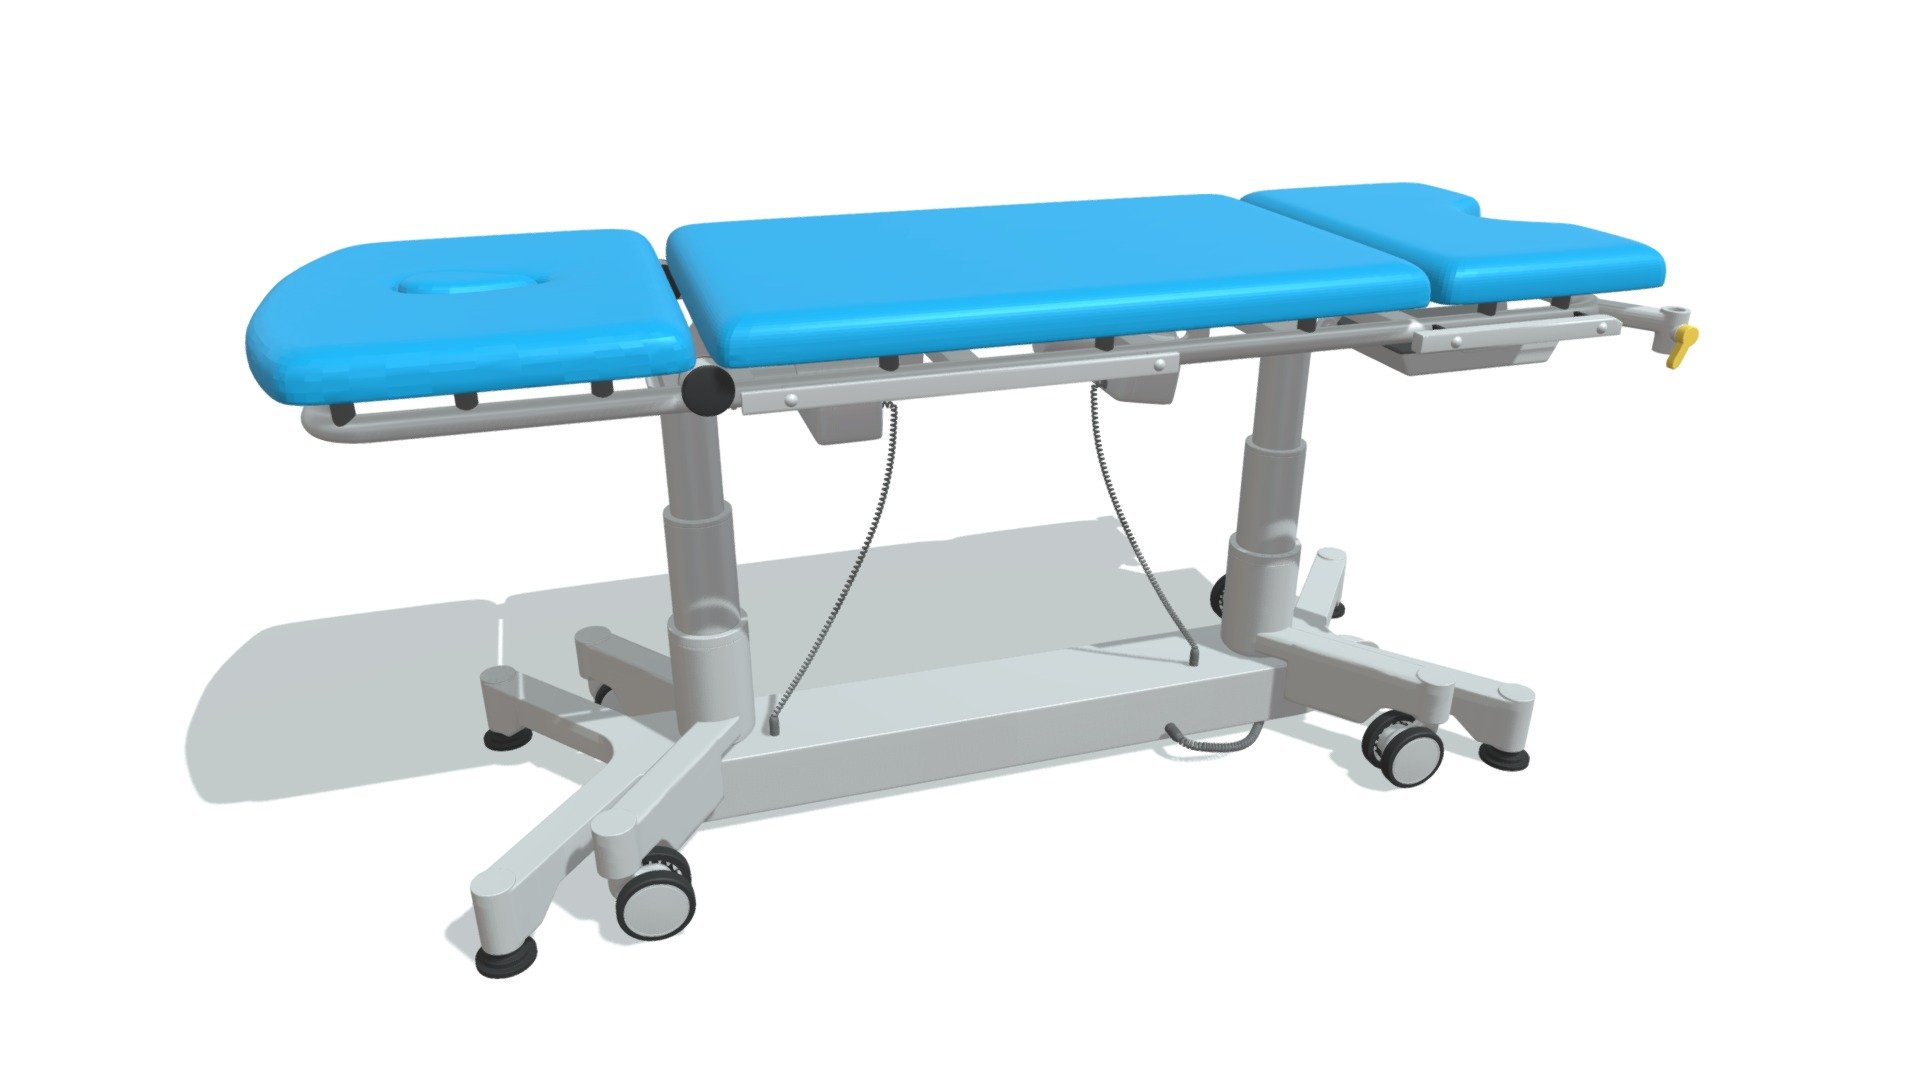 High quality 3d model of gynecological examination table.
If you need a file format that is different from what is available, please contact us 3d model